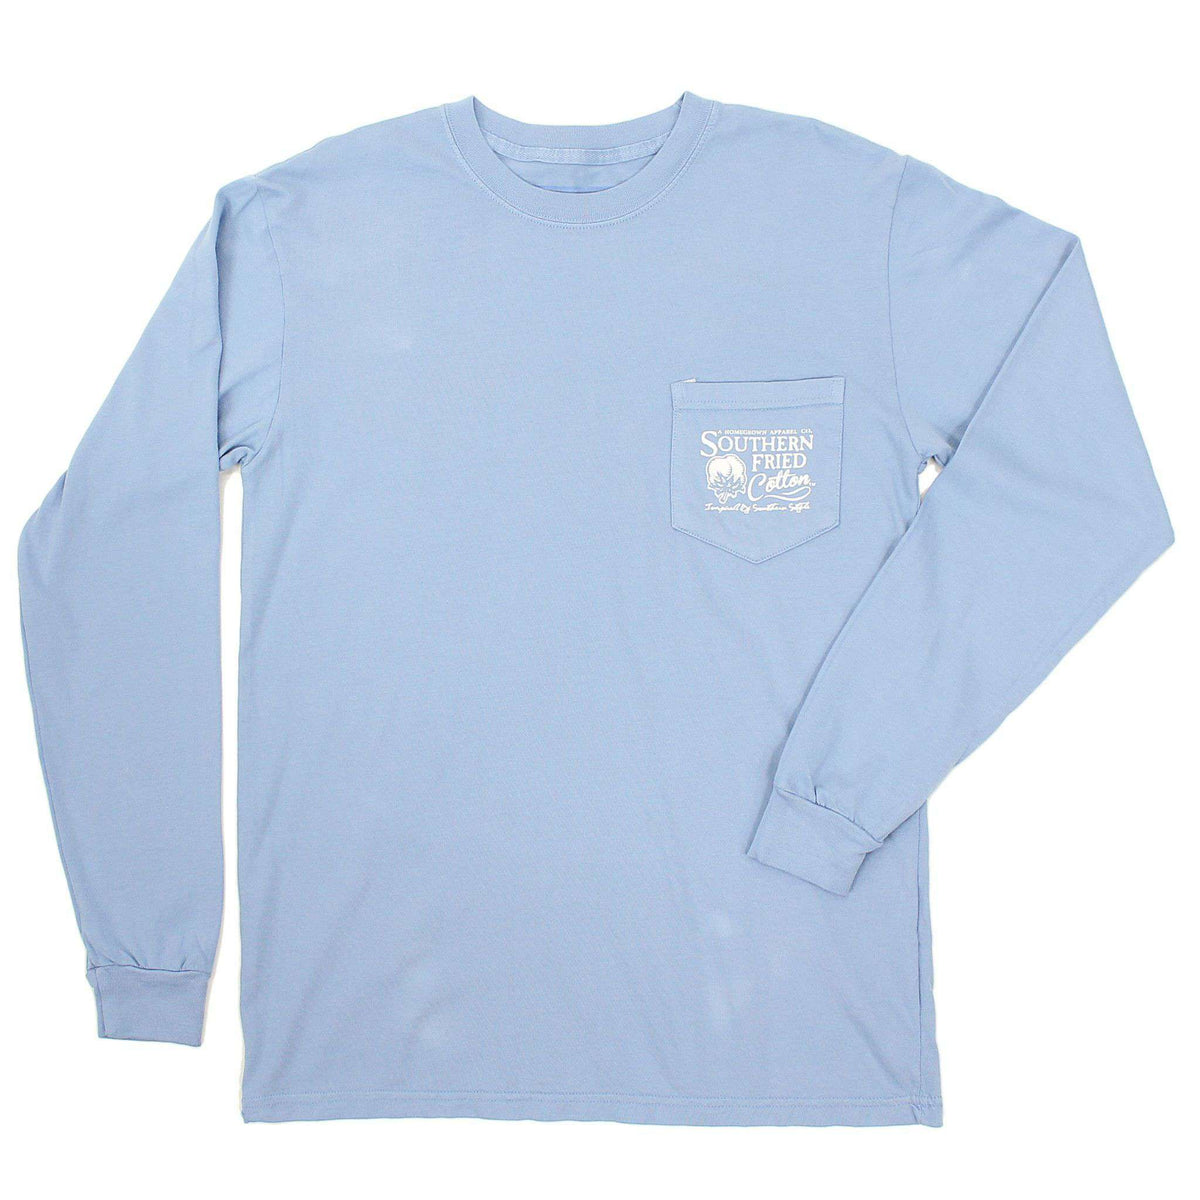 Bear Crossing Long Sleeve Tee Shirt in Washed Denim by Southern Fried Cotton - Country Club Prep